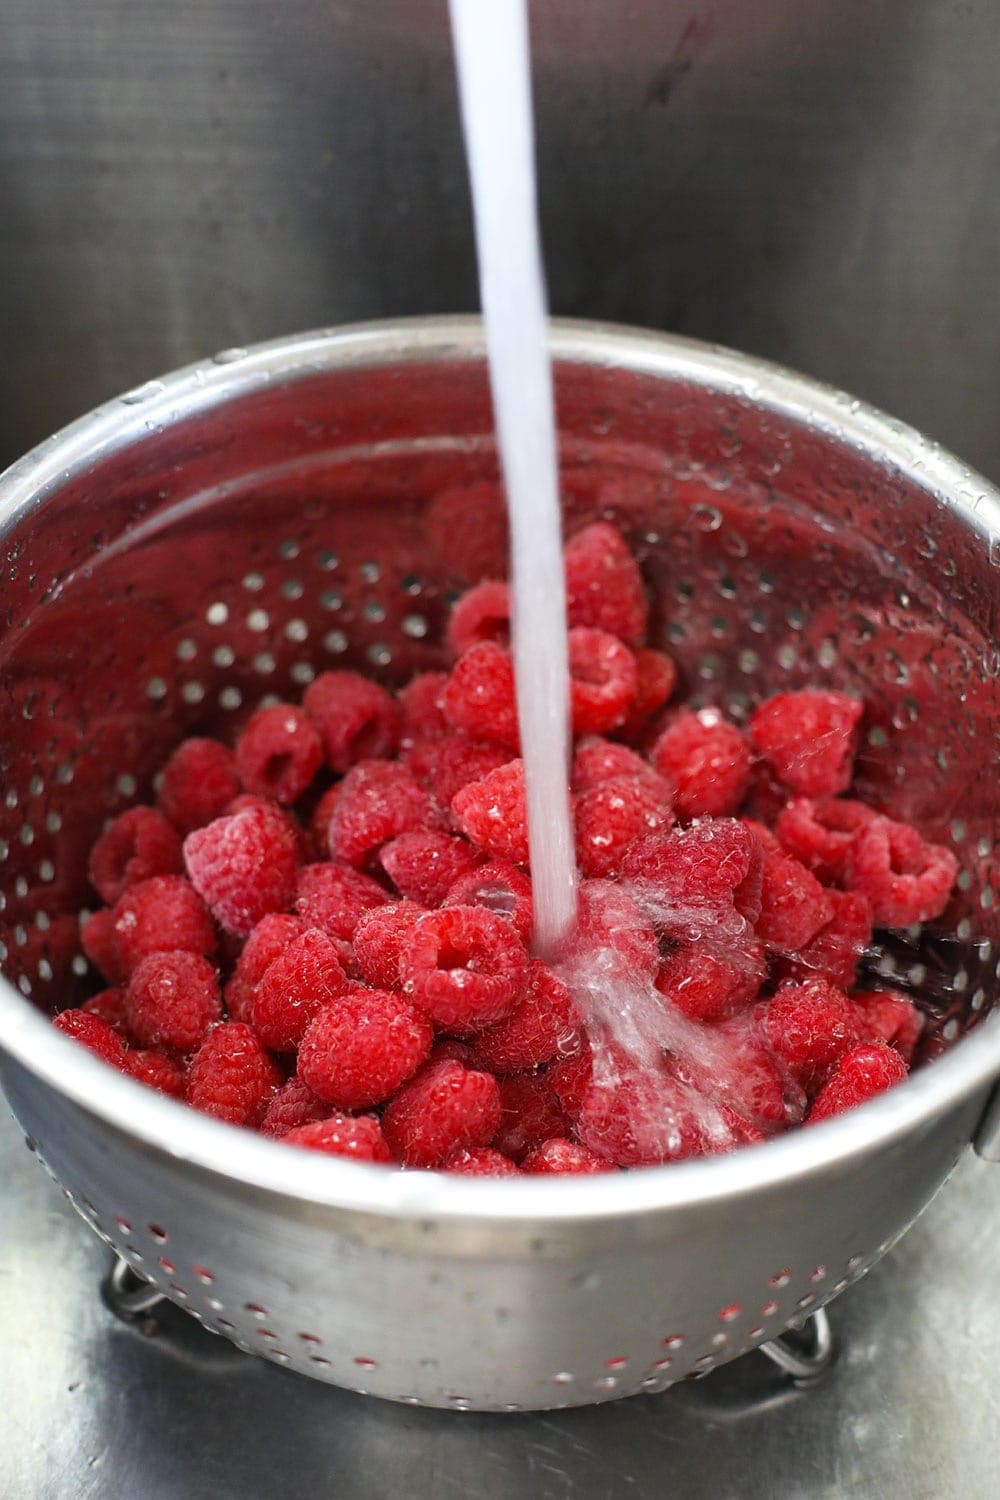 raspberries being washed in a colander